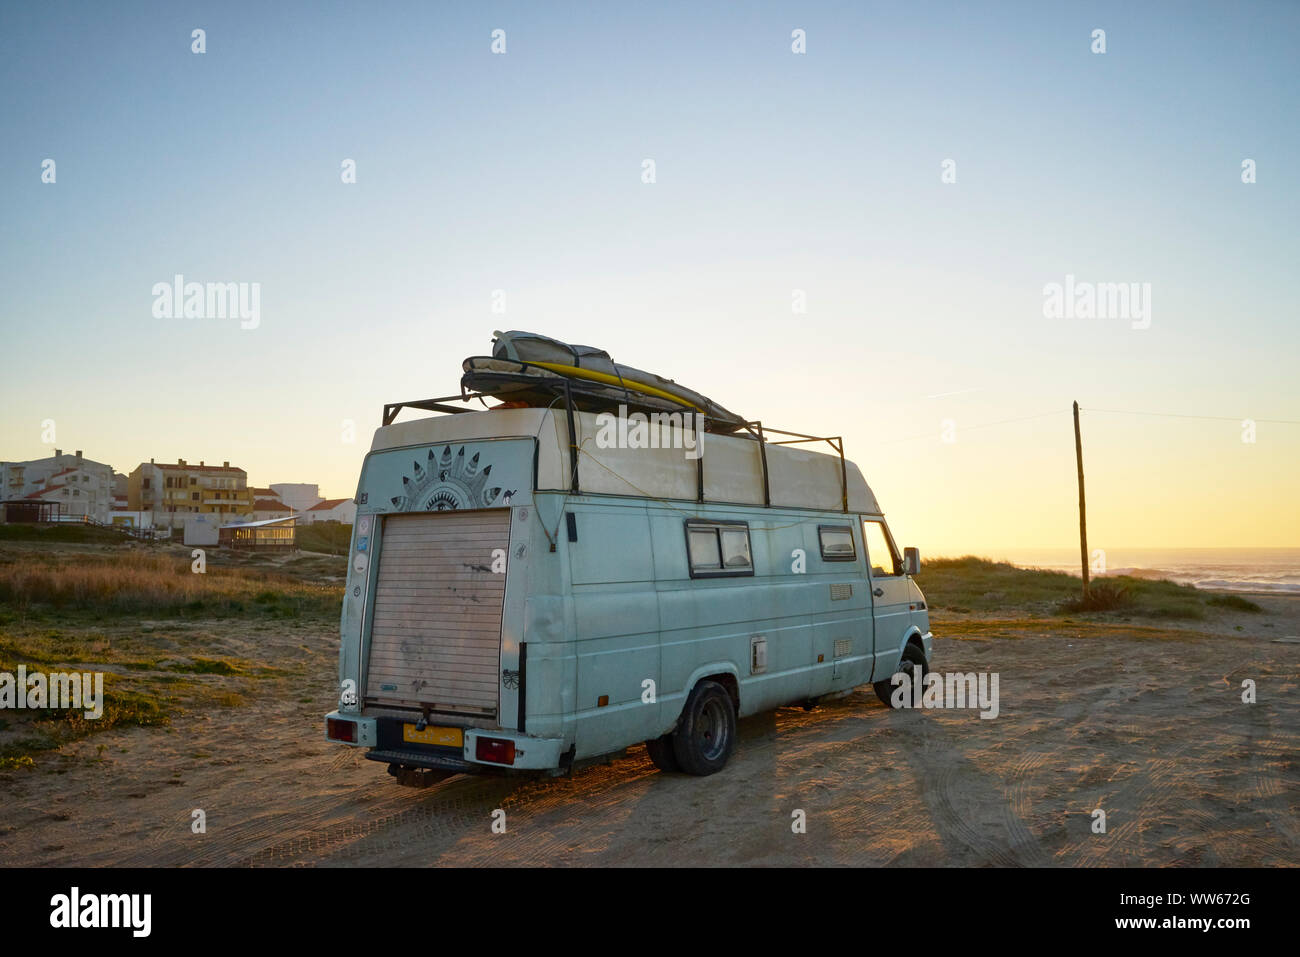 Old camper on the beach, surfboard on the roof Stock Photo